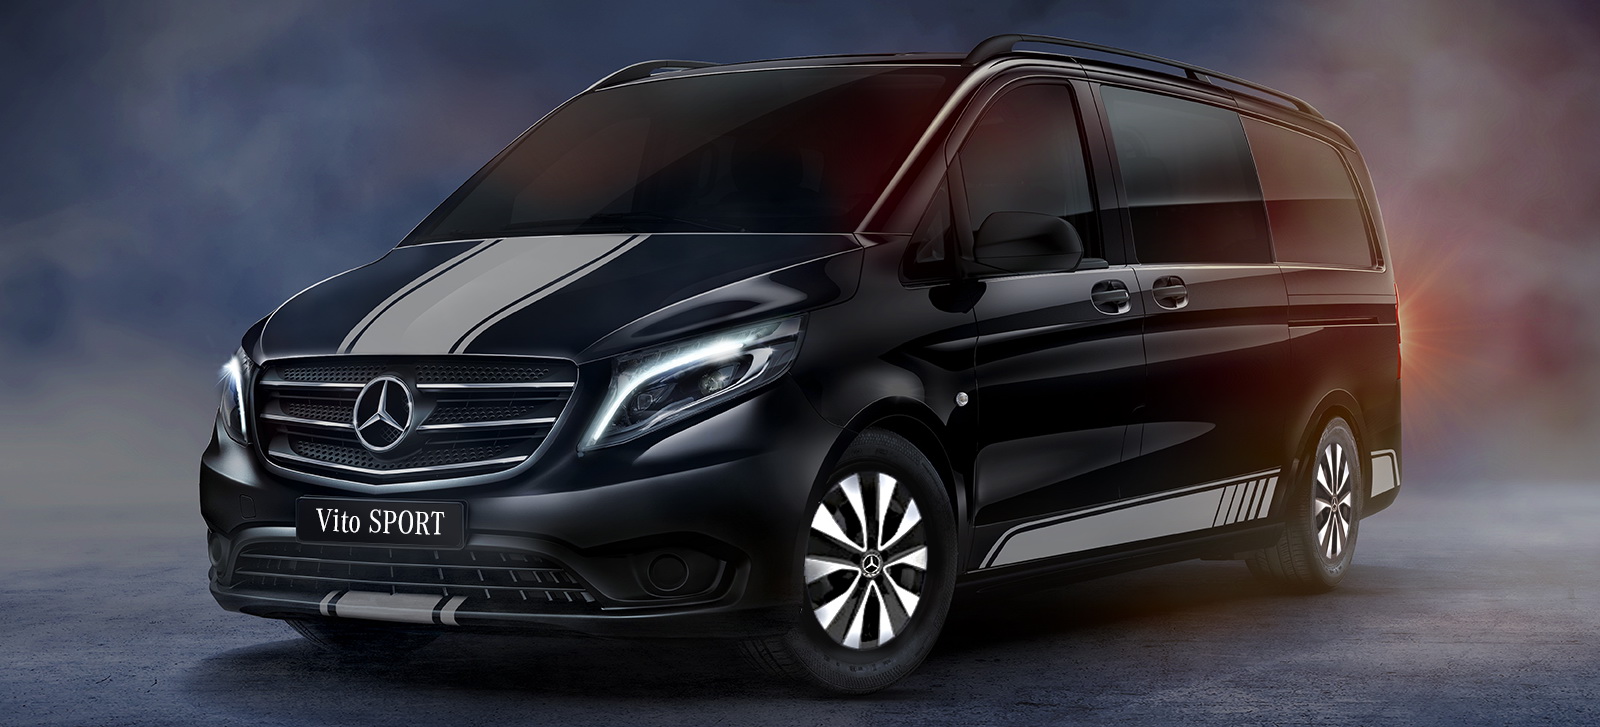 New Mercedes Vito Sport Lands In Uk With 37 475 Price Tag